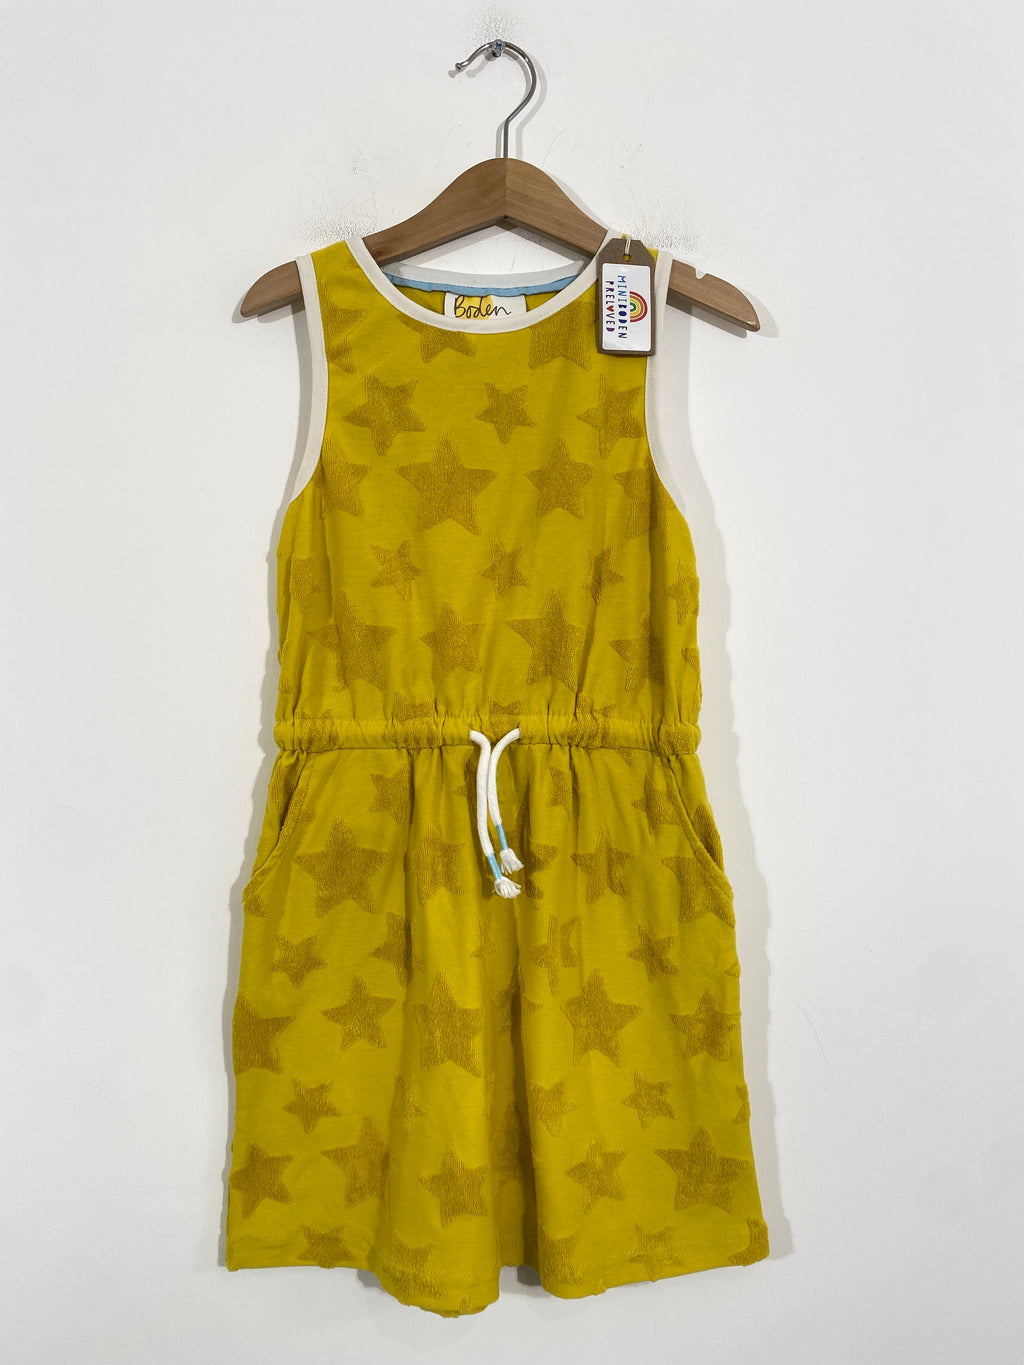 Gorgeous Mustard Star Patterned Dress (6-7 Years)